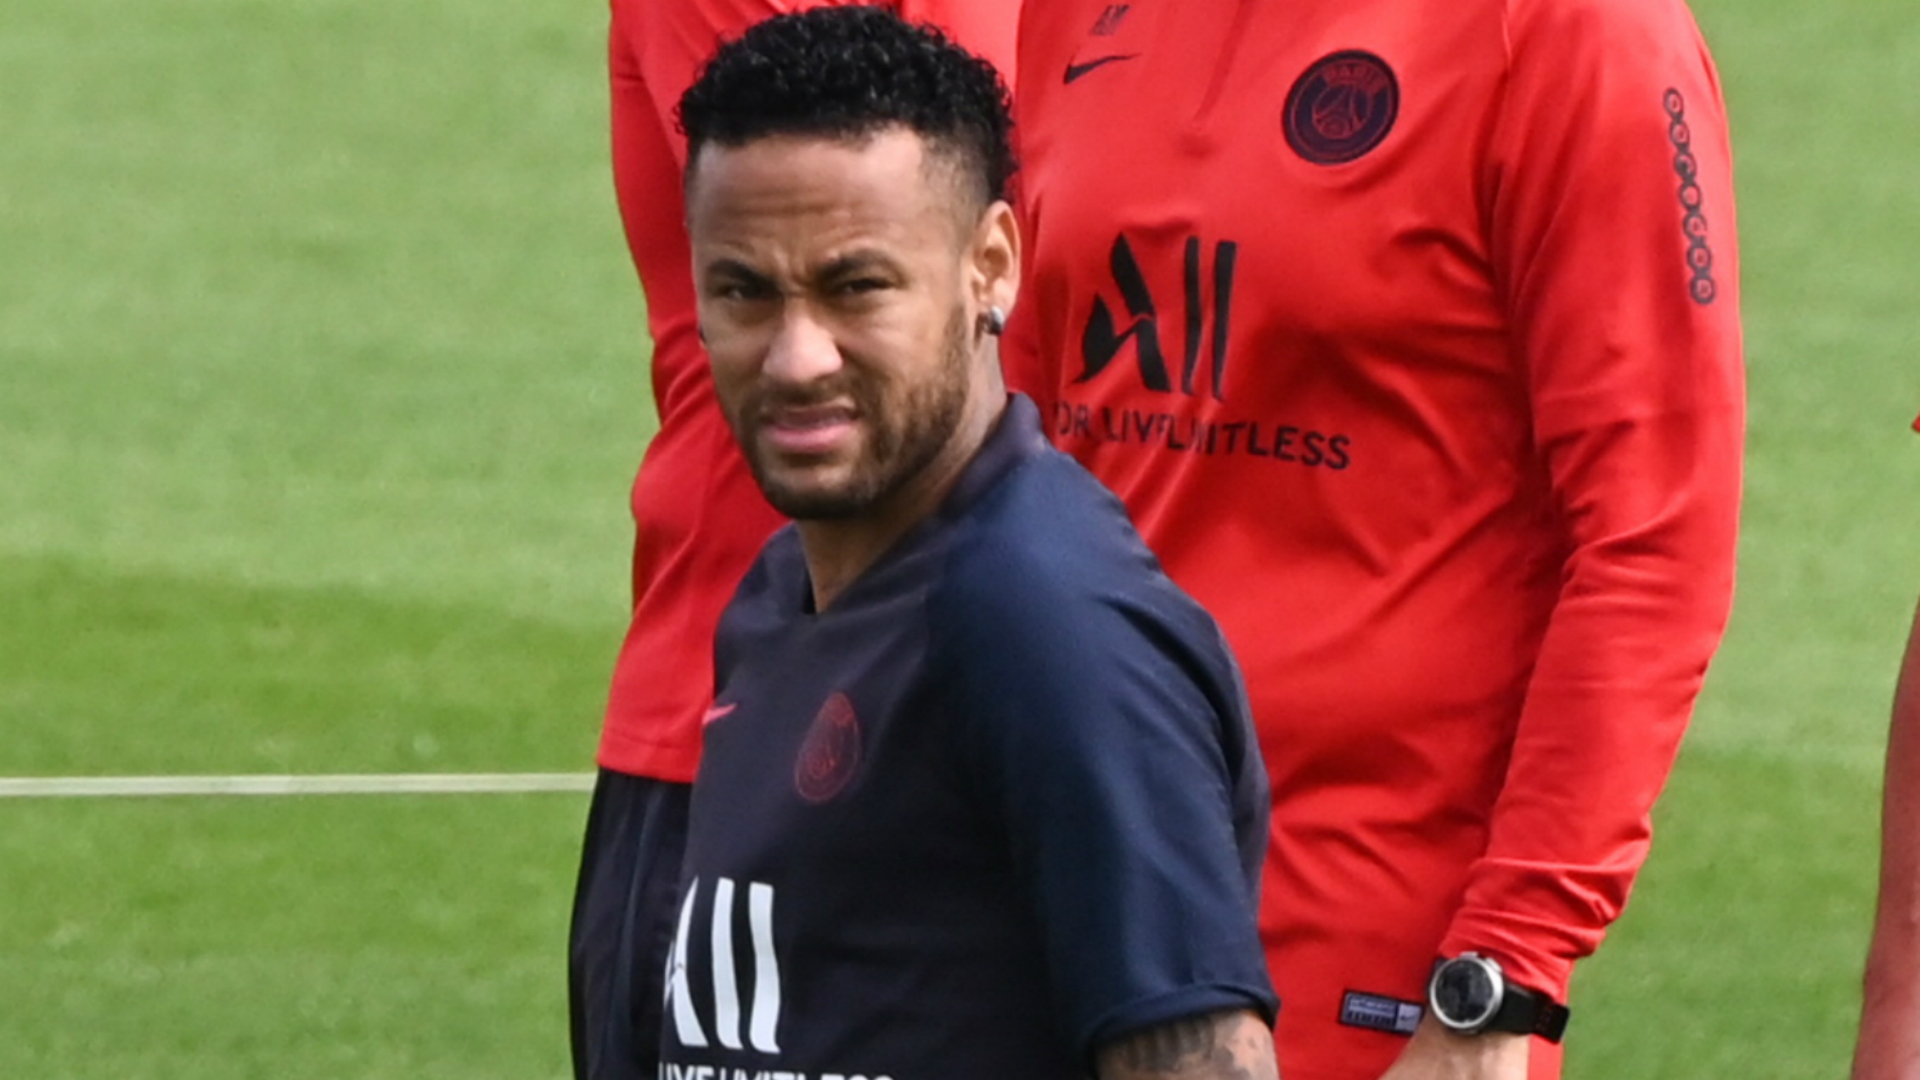 Marseille boss Andre Villas-Boas hailed PSG's Neymar, who is reportedly eyeing a move to Barcelona or Real Madrid.